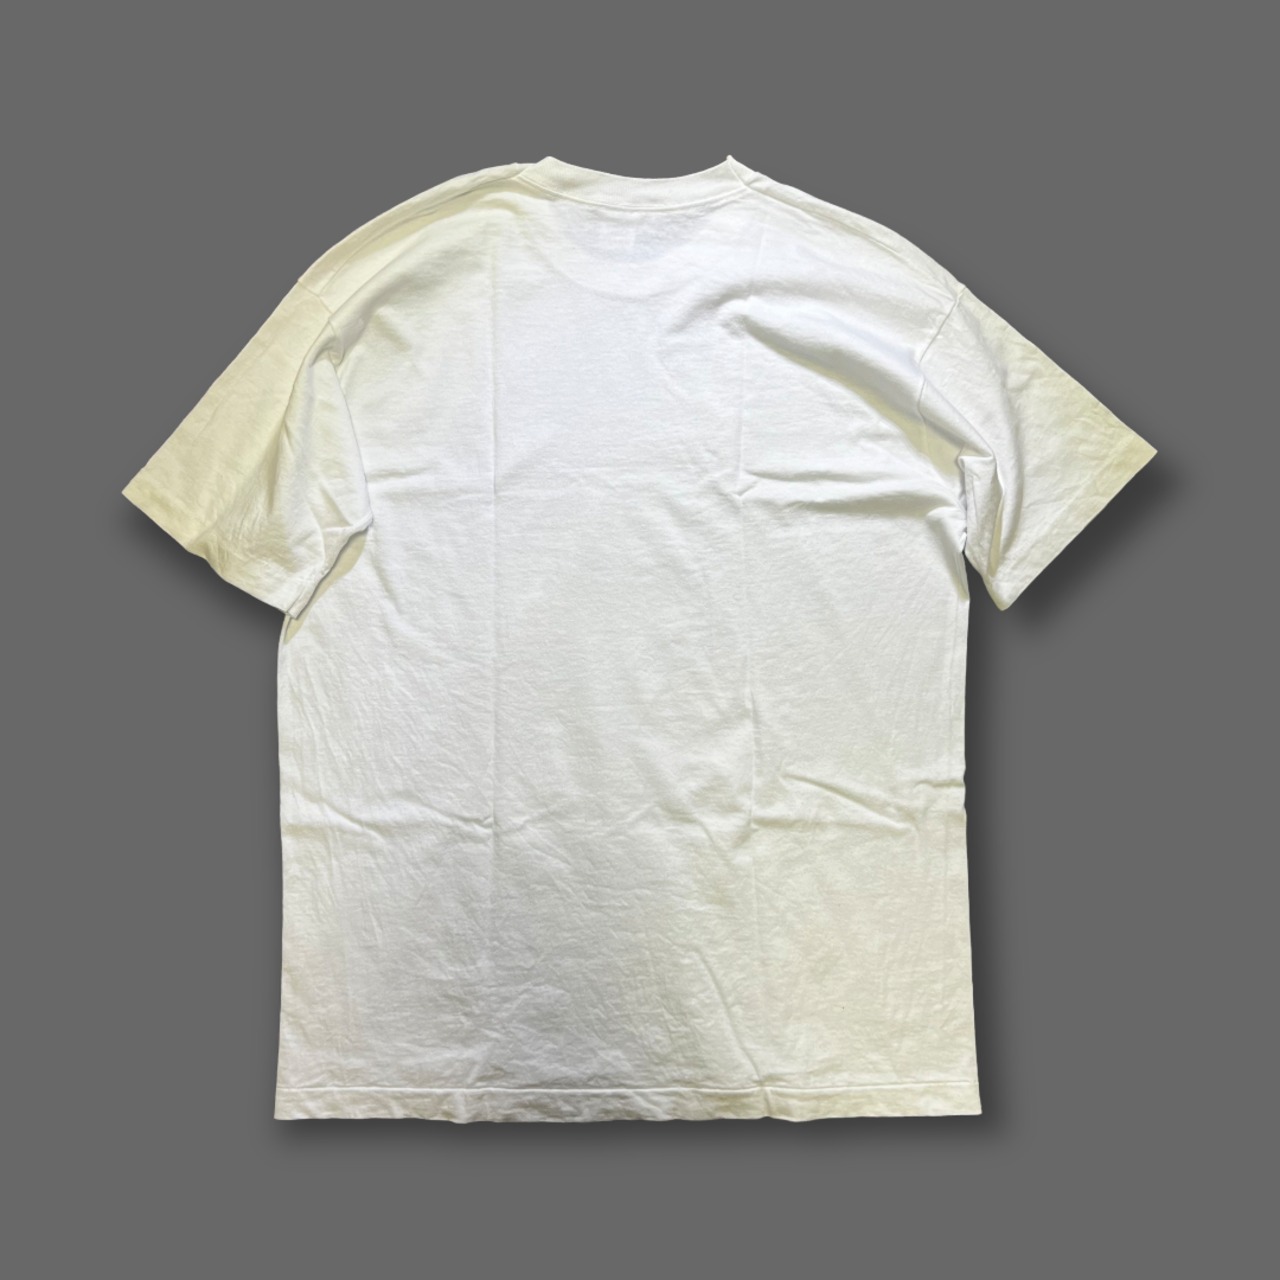 1990s FRUIT OF THE LOOM Blank T-Shirts